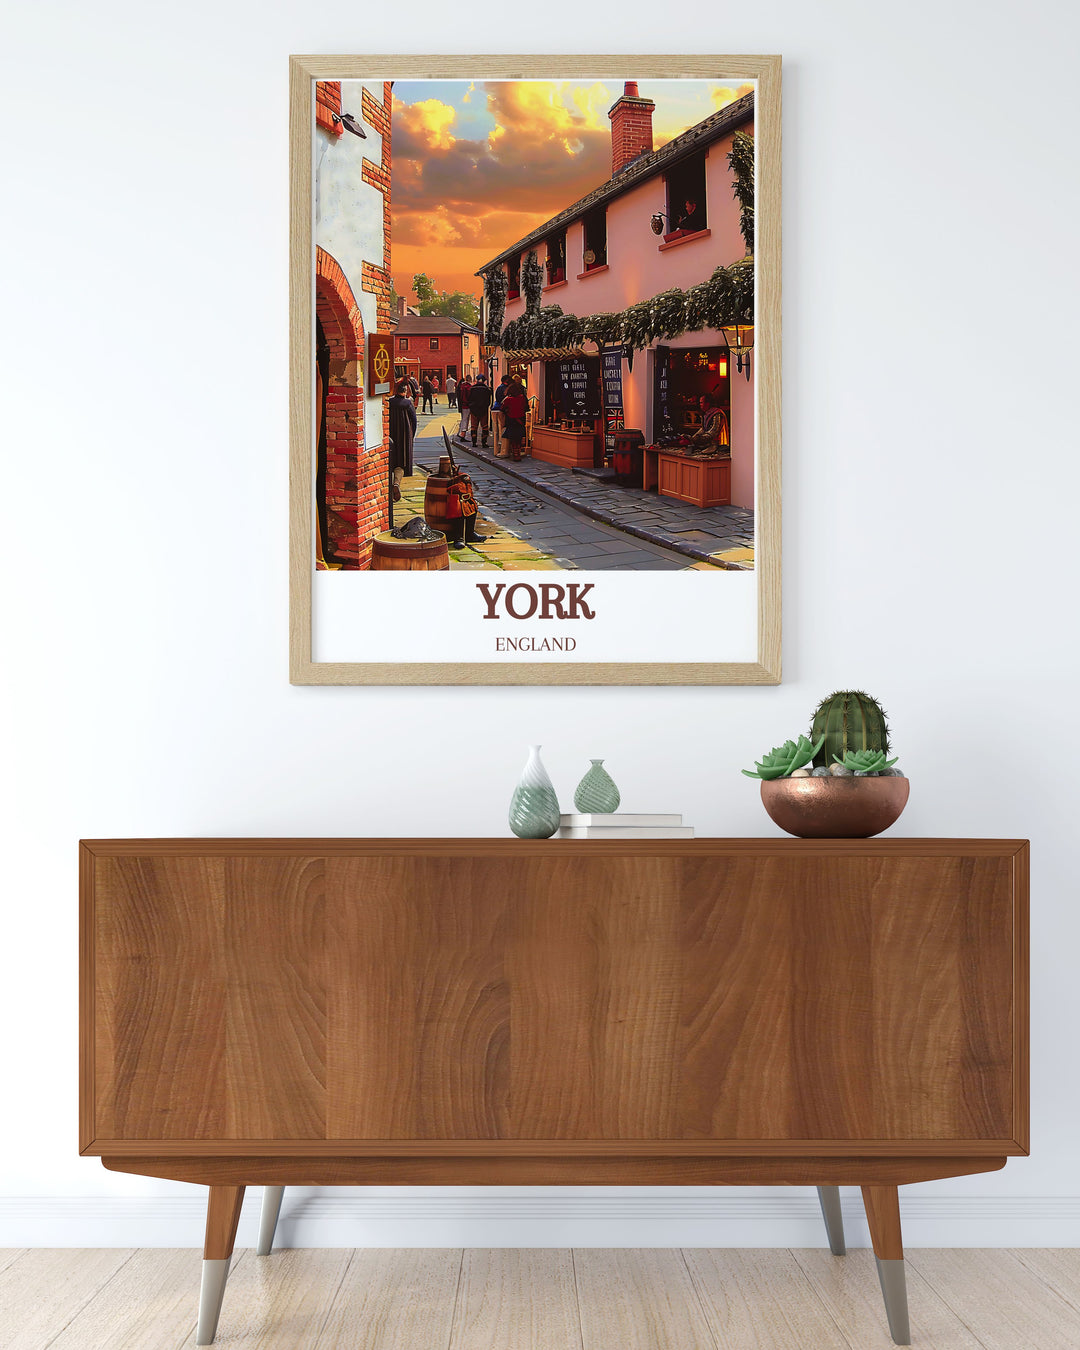 Framed Print of the North Yorkshire countryside highlighting the beauty of the Howardian Hills AONB. This piece blends natural landscapes with ENGLAND, Jorvik Viking history for a timeless art decor.